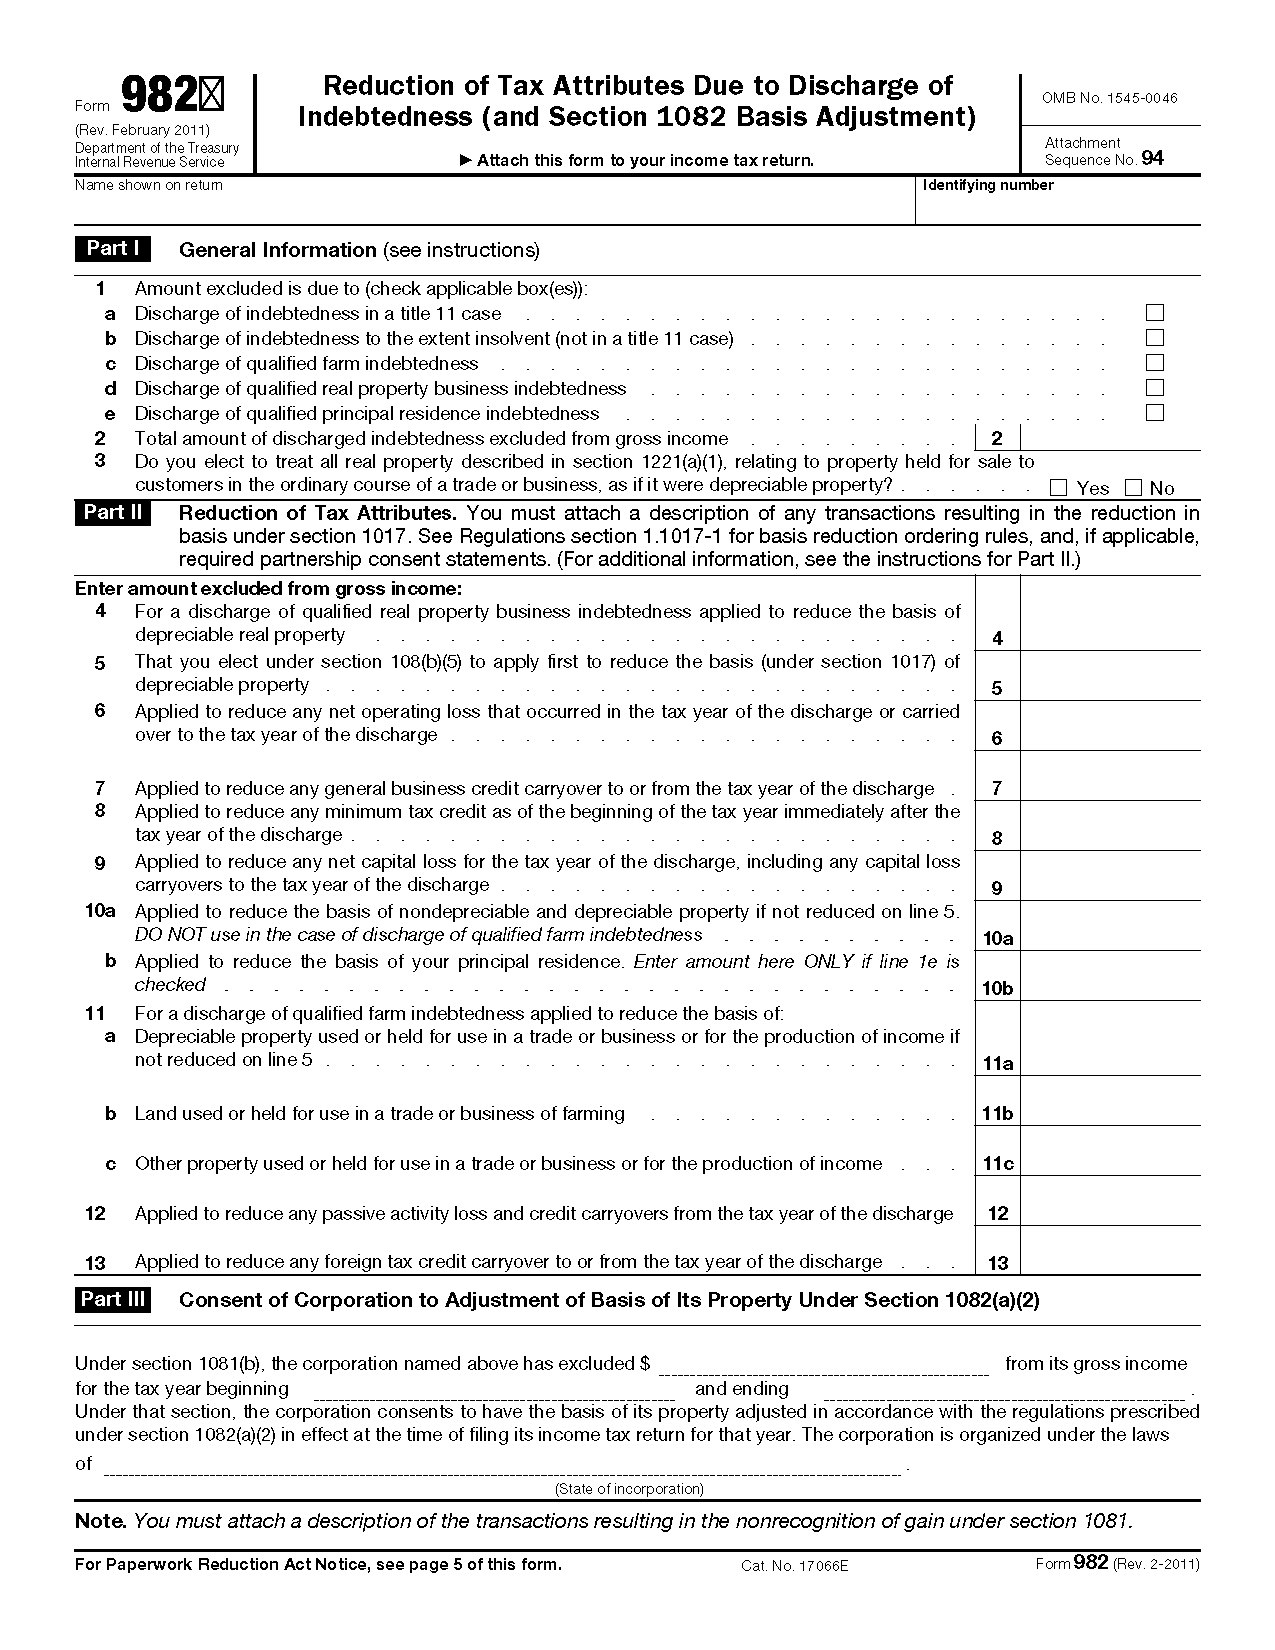 001 Irs Form Beautiful 982 Templates Identifying Number Tax And Tax Form 982 Insolvency Worksheet